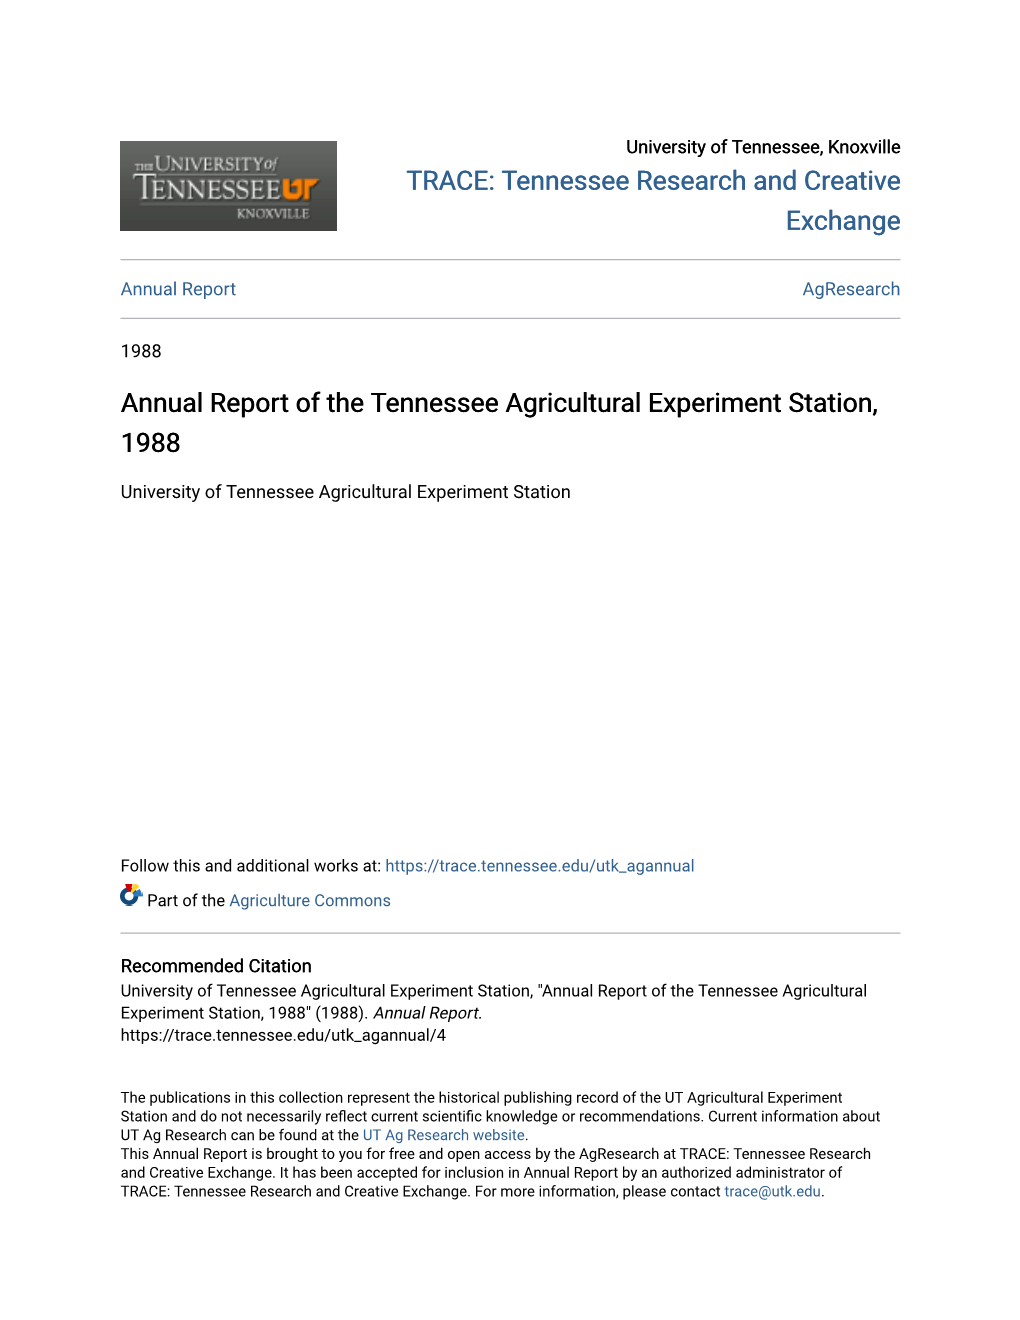 Annual Report of the Tennessee Agricultural Experiment Station, 1988